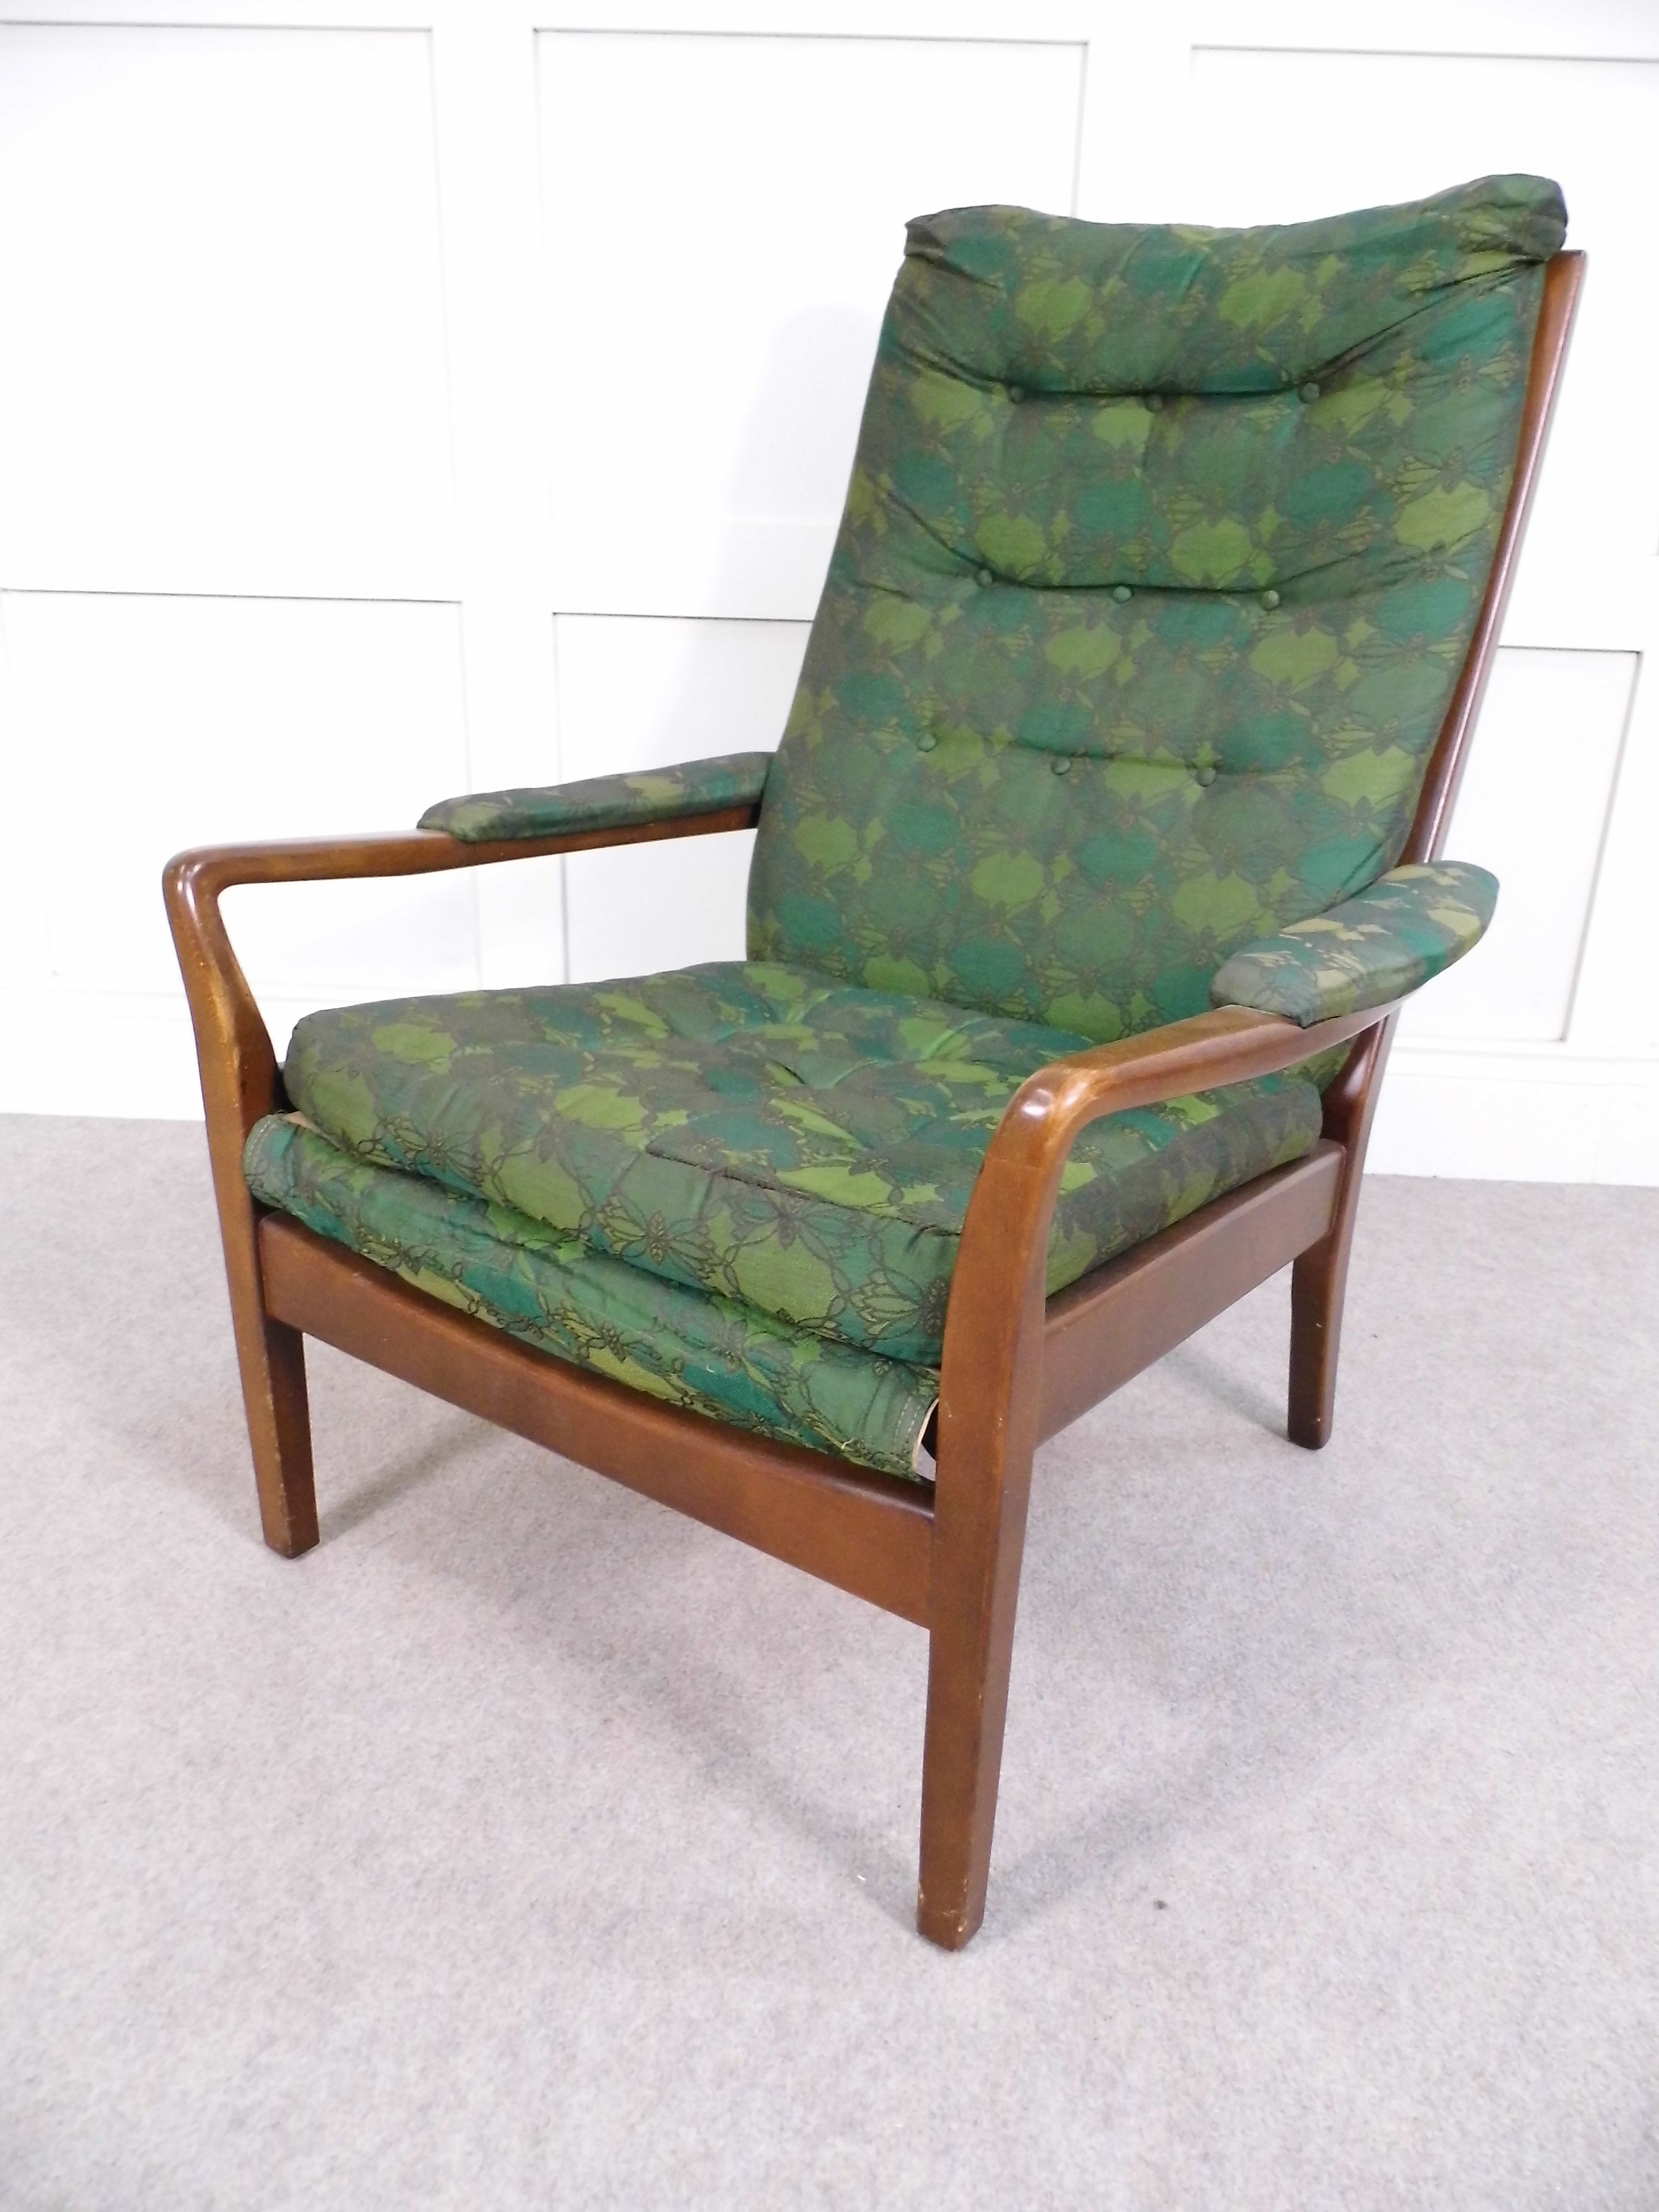 Amazing New Vintage Cintique Armchair With Vintage Retro 1959 Cintique C5 Deluxe Group Chair Mid Century (Photo 9 of 15)